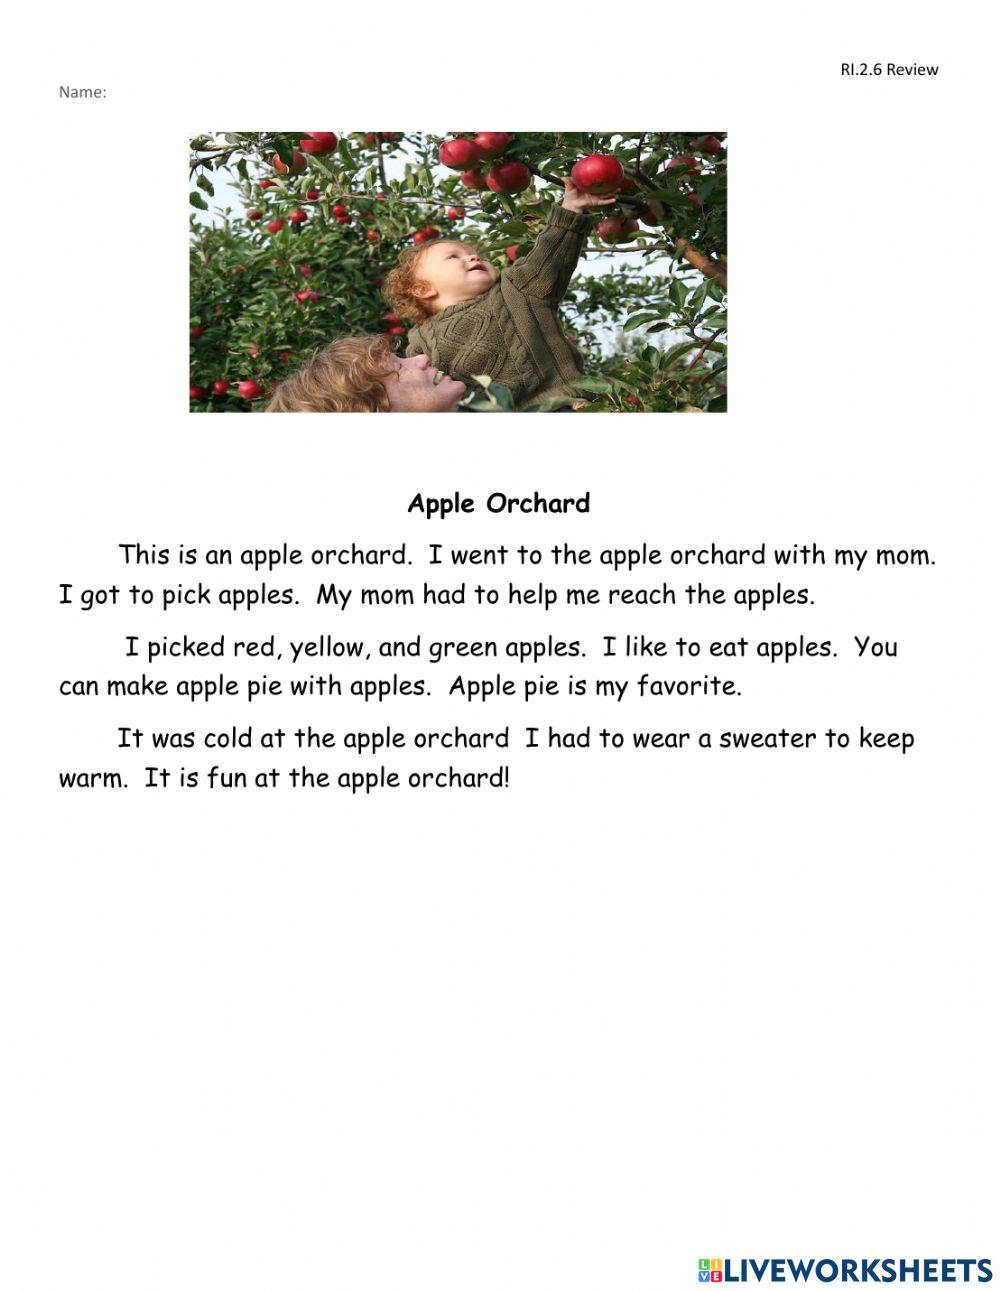 I went to the apple orchard-text and picture comparison